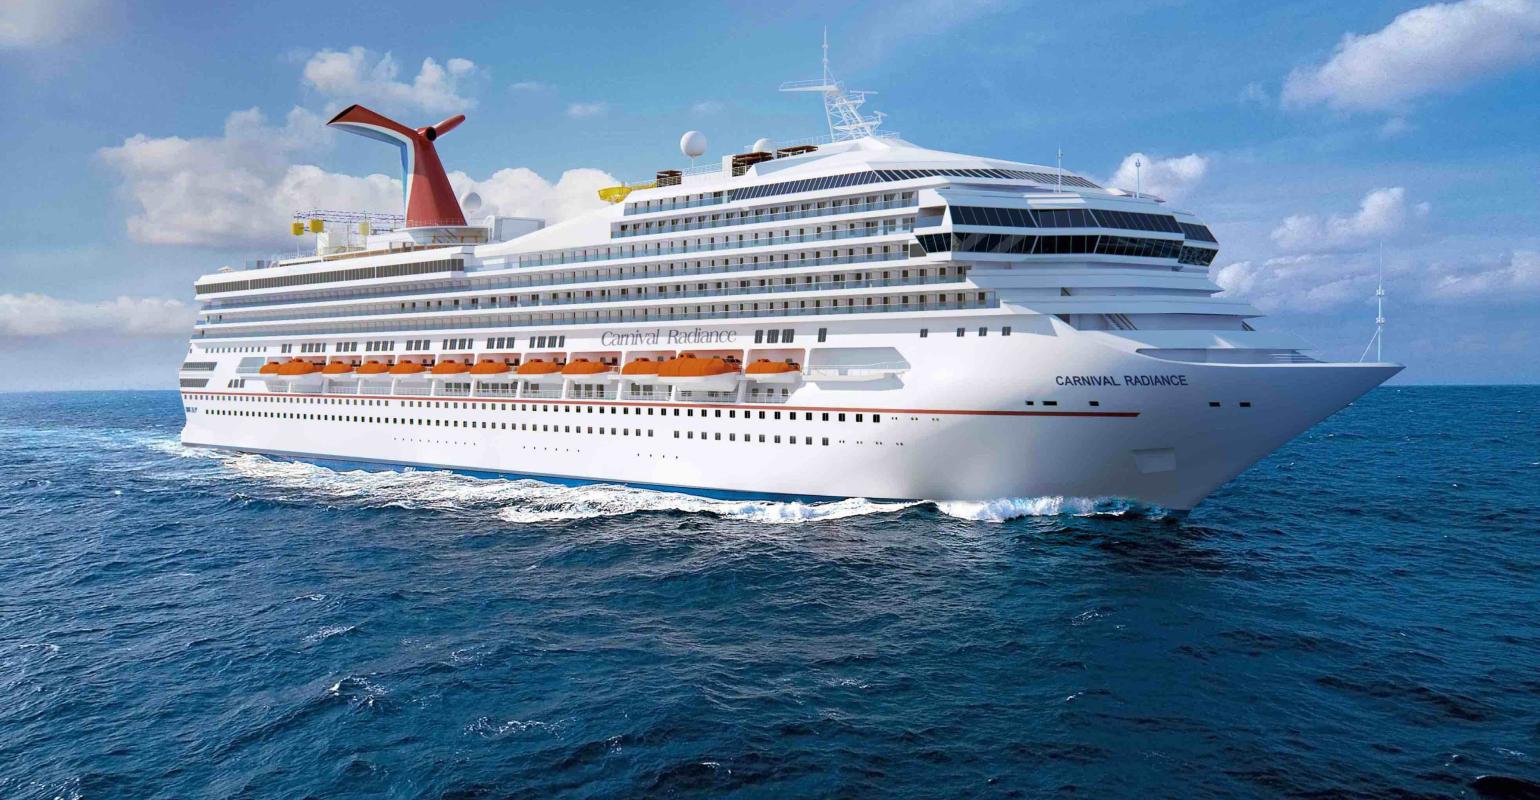 Radiance debut has Med, Bermuda, Carnival's first Cuba cruises from